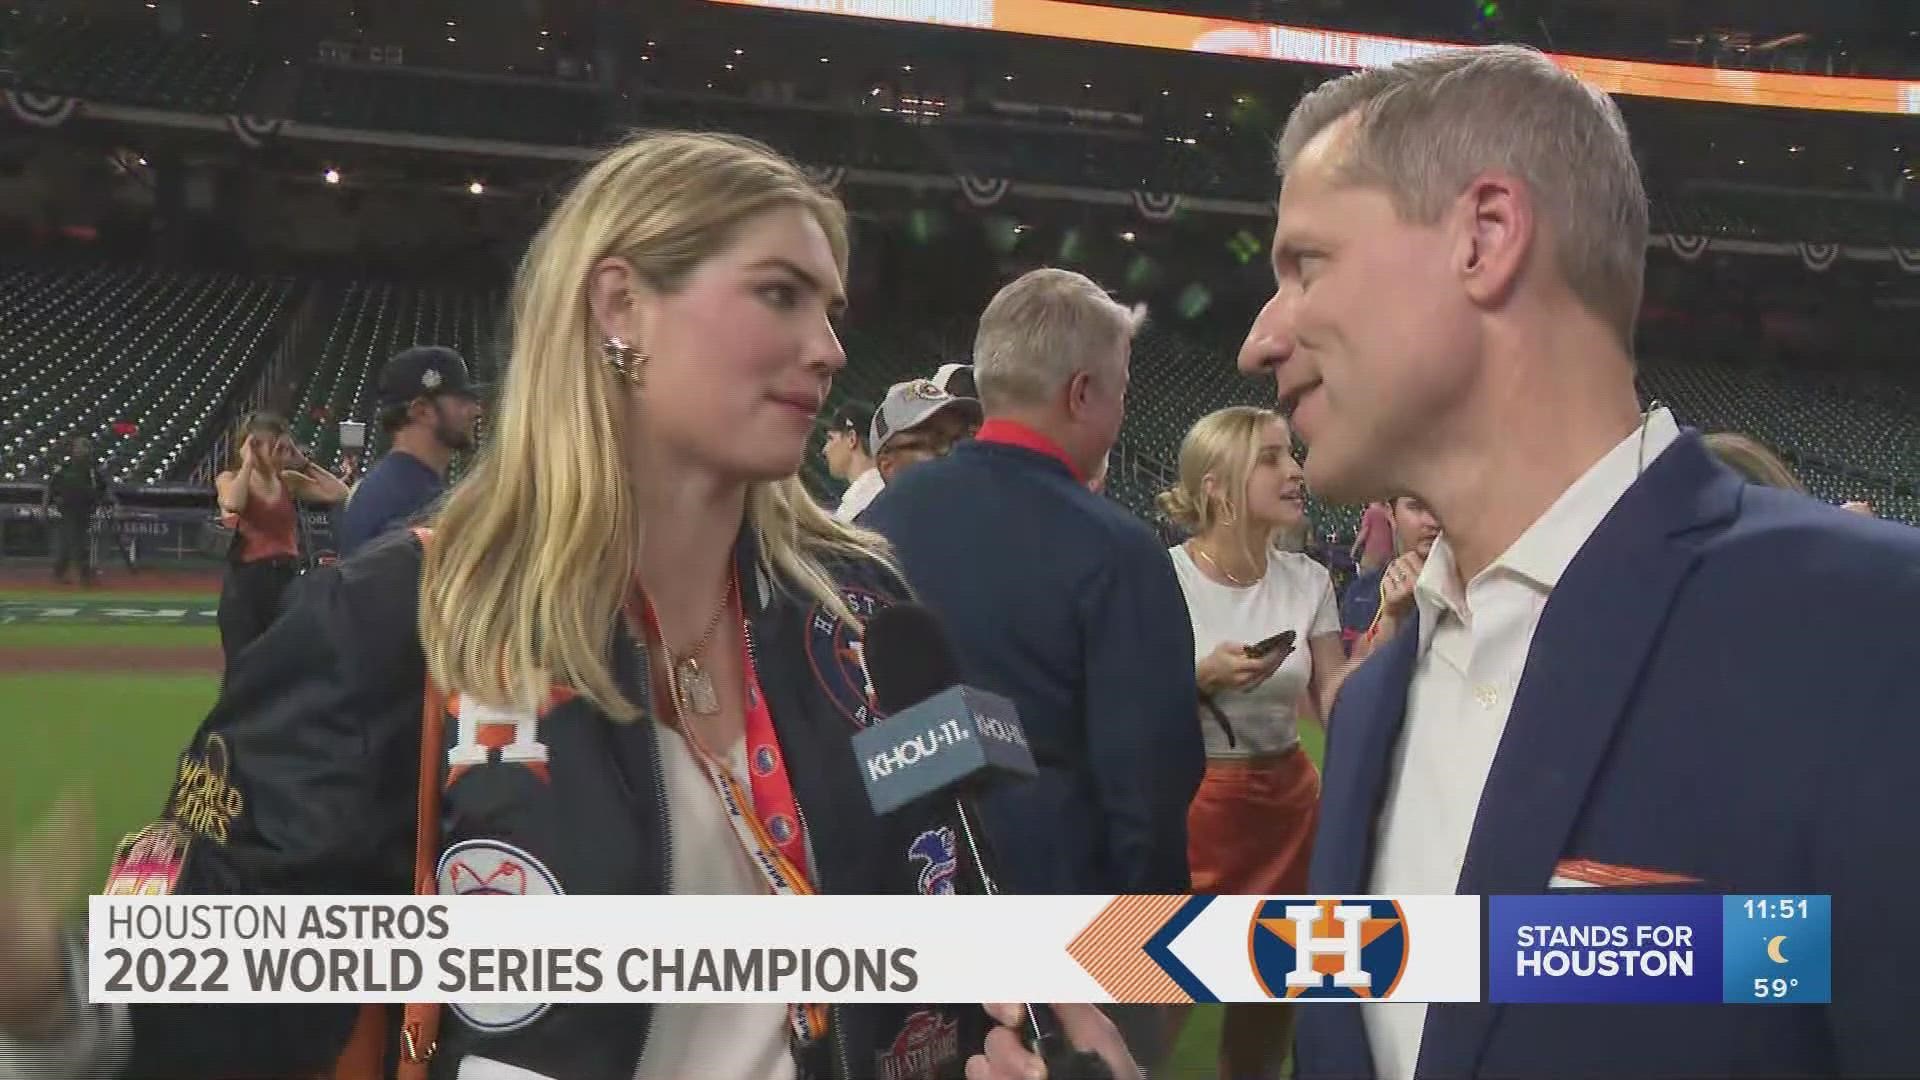 Kate Upton said the Houston Astros second World Series title feels surreal because the team won it at home and was surrounded by love.